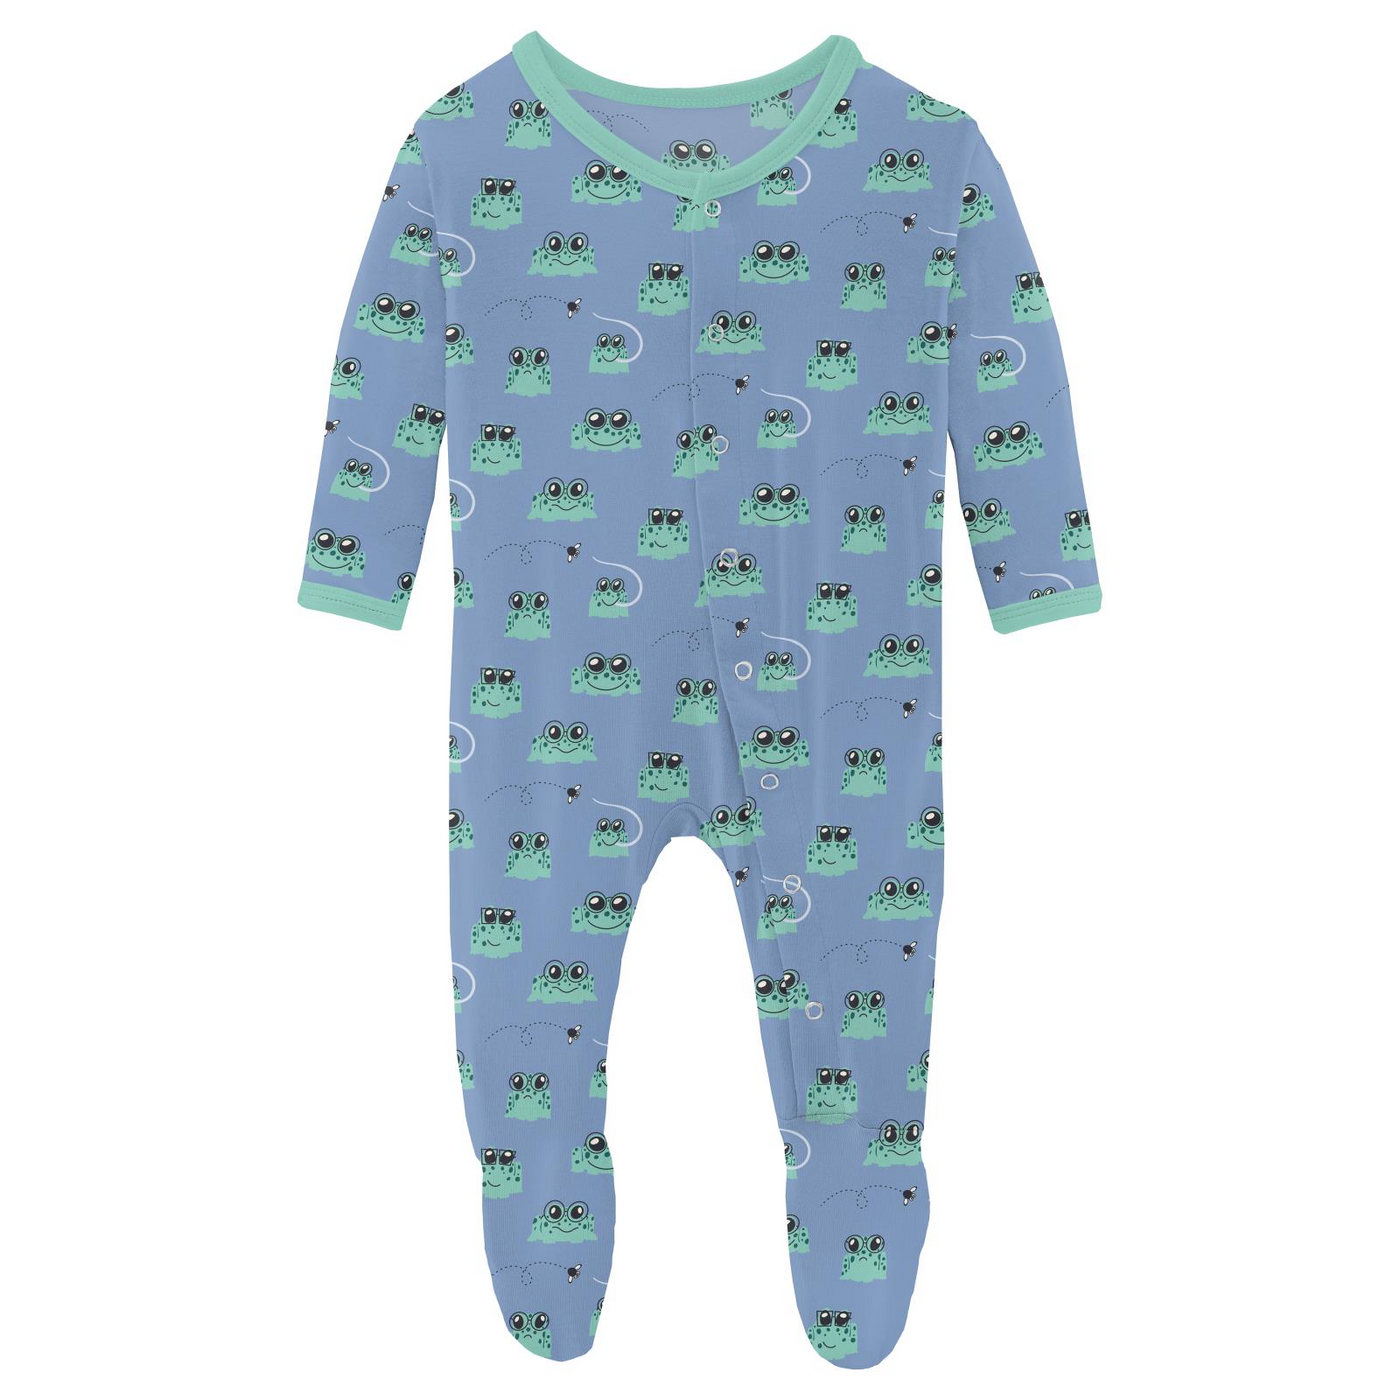 Kickee Pants Footie With Snaps: Dream Blue Bespeckled Frogs  (Ships 5/15-6/15)